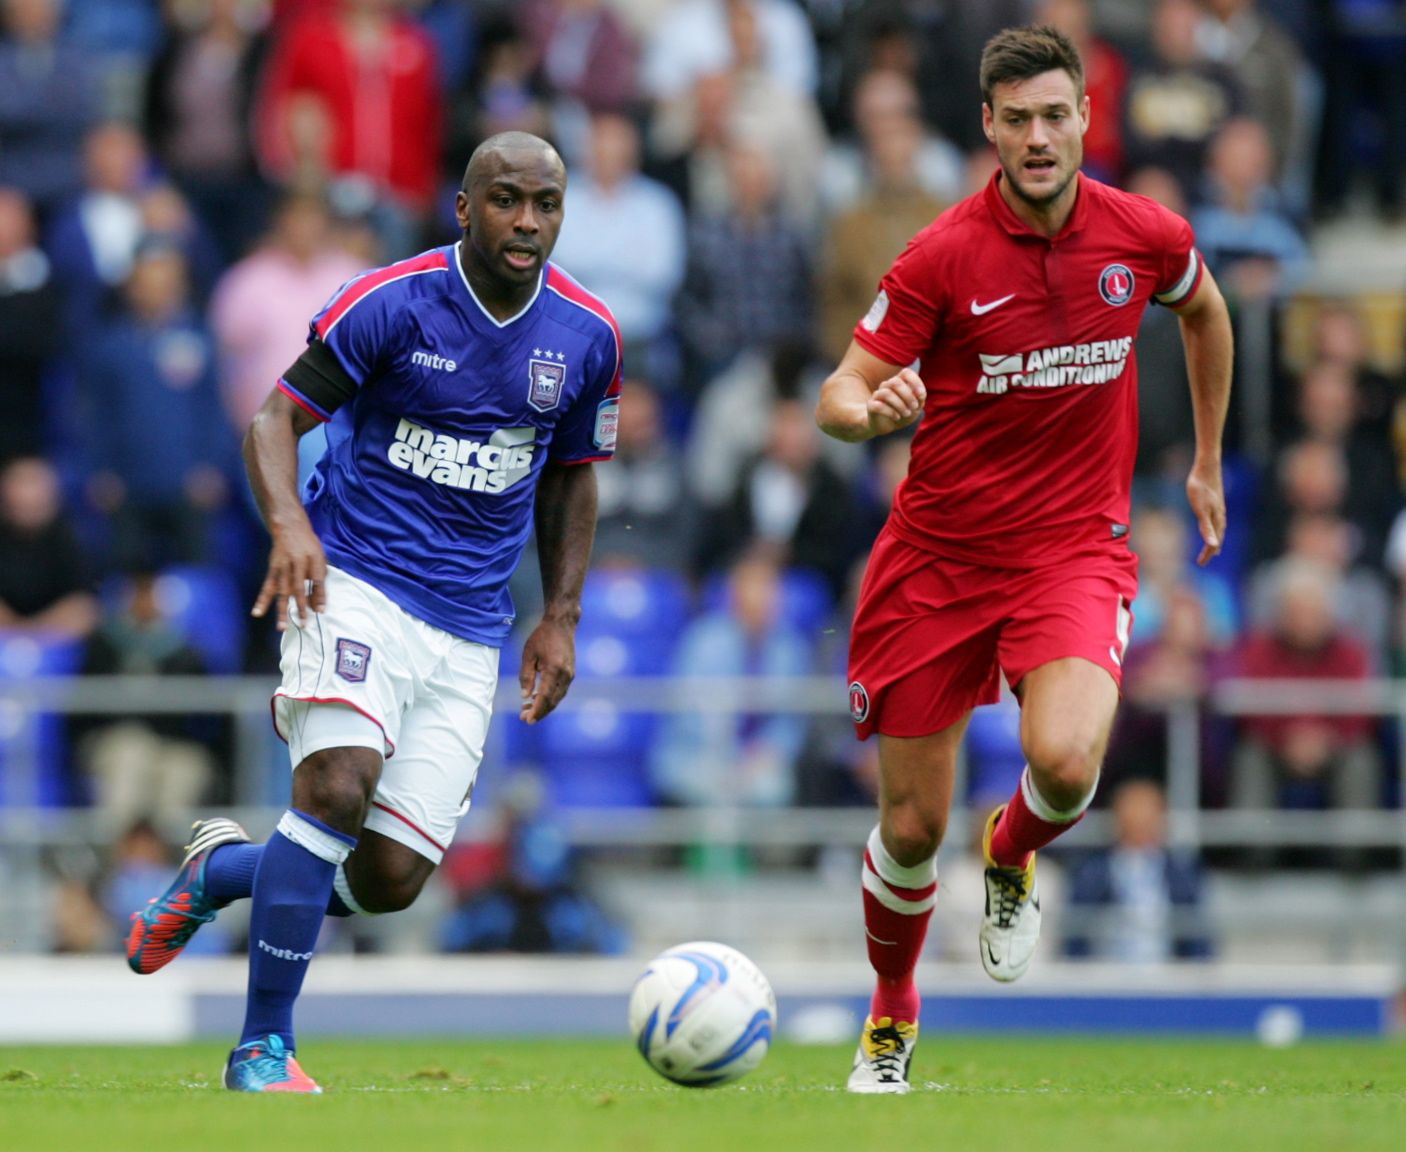 Football - Ipswich Town v Charlton Athletic - npower Football League Championship  - Portman Road - 12/13 - 22/9/12 
Ipswich's Jason Scotland  in action against Charlton's Johnnie Jackson 
Mandatory Credit: Action Images / David Field 
EDITORIAL USE ONLY. No use with unauthorized audio, video, data, fixture lists, club/league logos or live services. Online in-match use limited to 45 images, no video emulation. No use in betting, games or single club/league/player publications.  Please contact yo